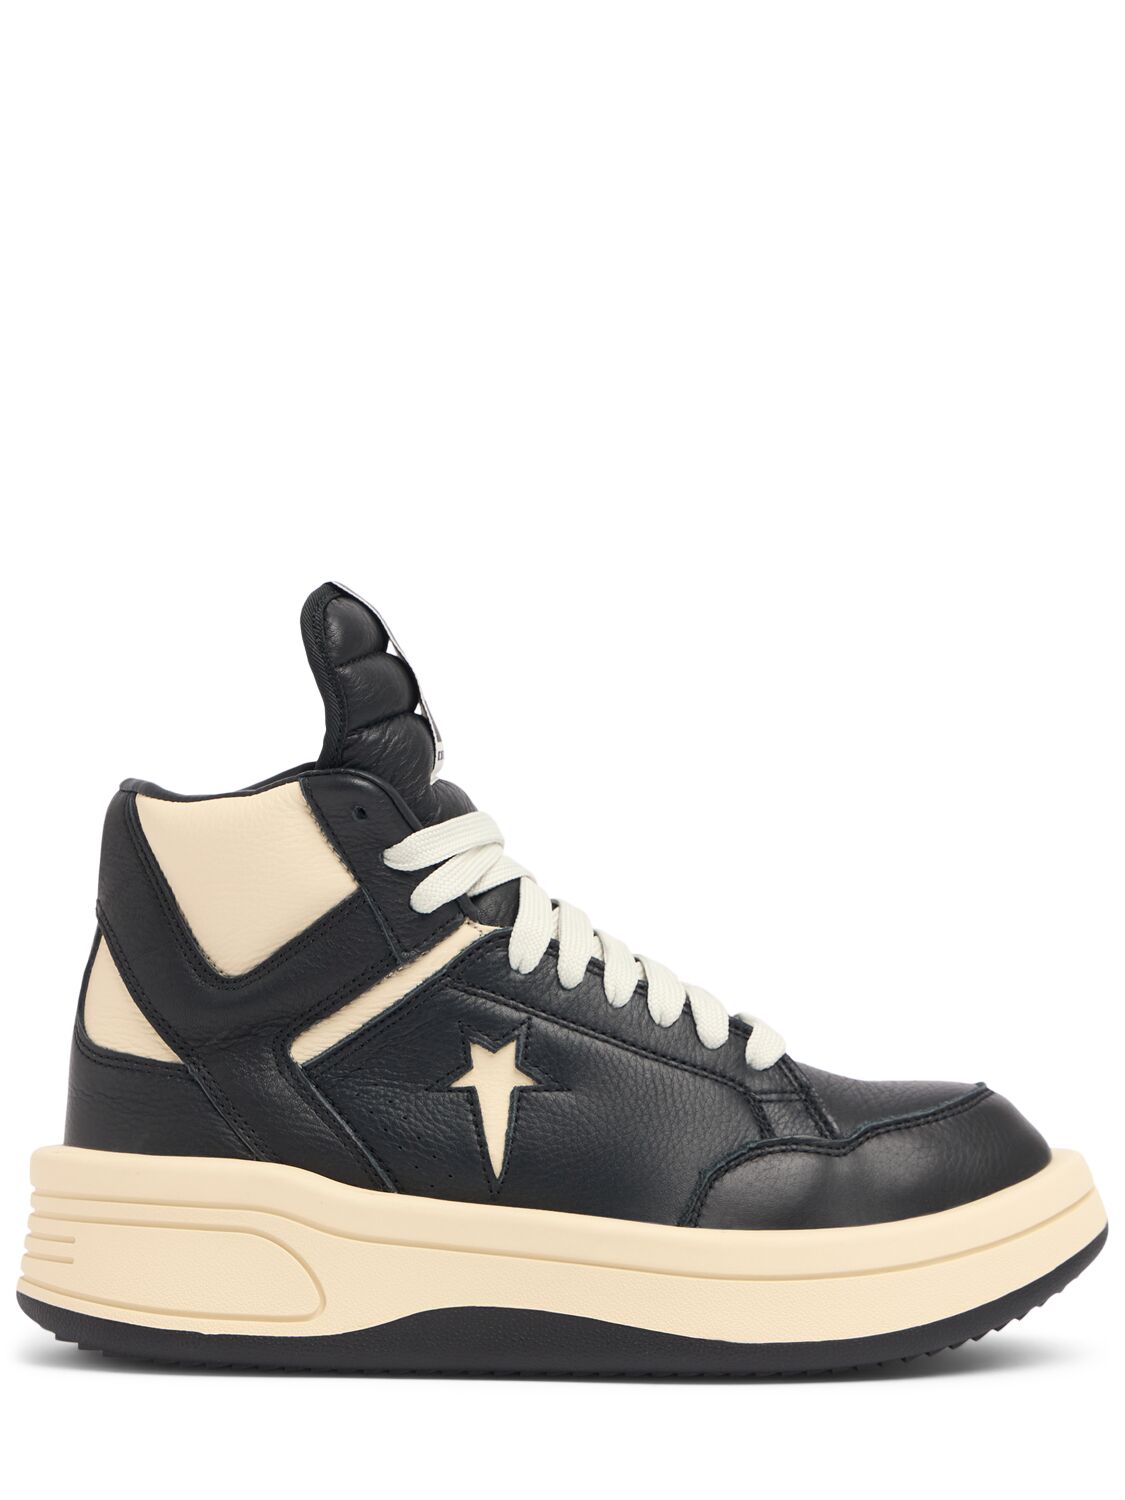 Drkshdw X Converse Turbowpn Leather Trainers In Black,white